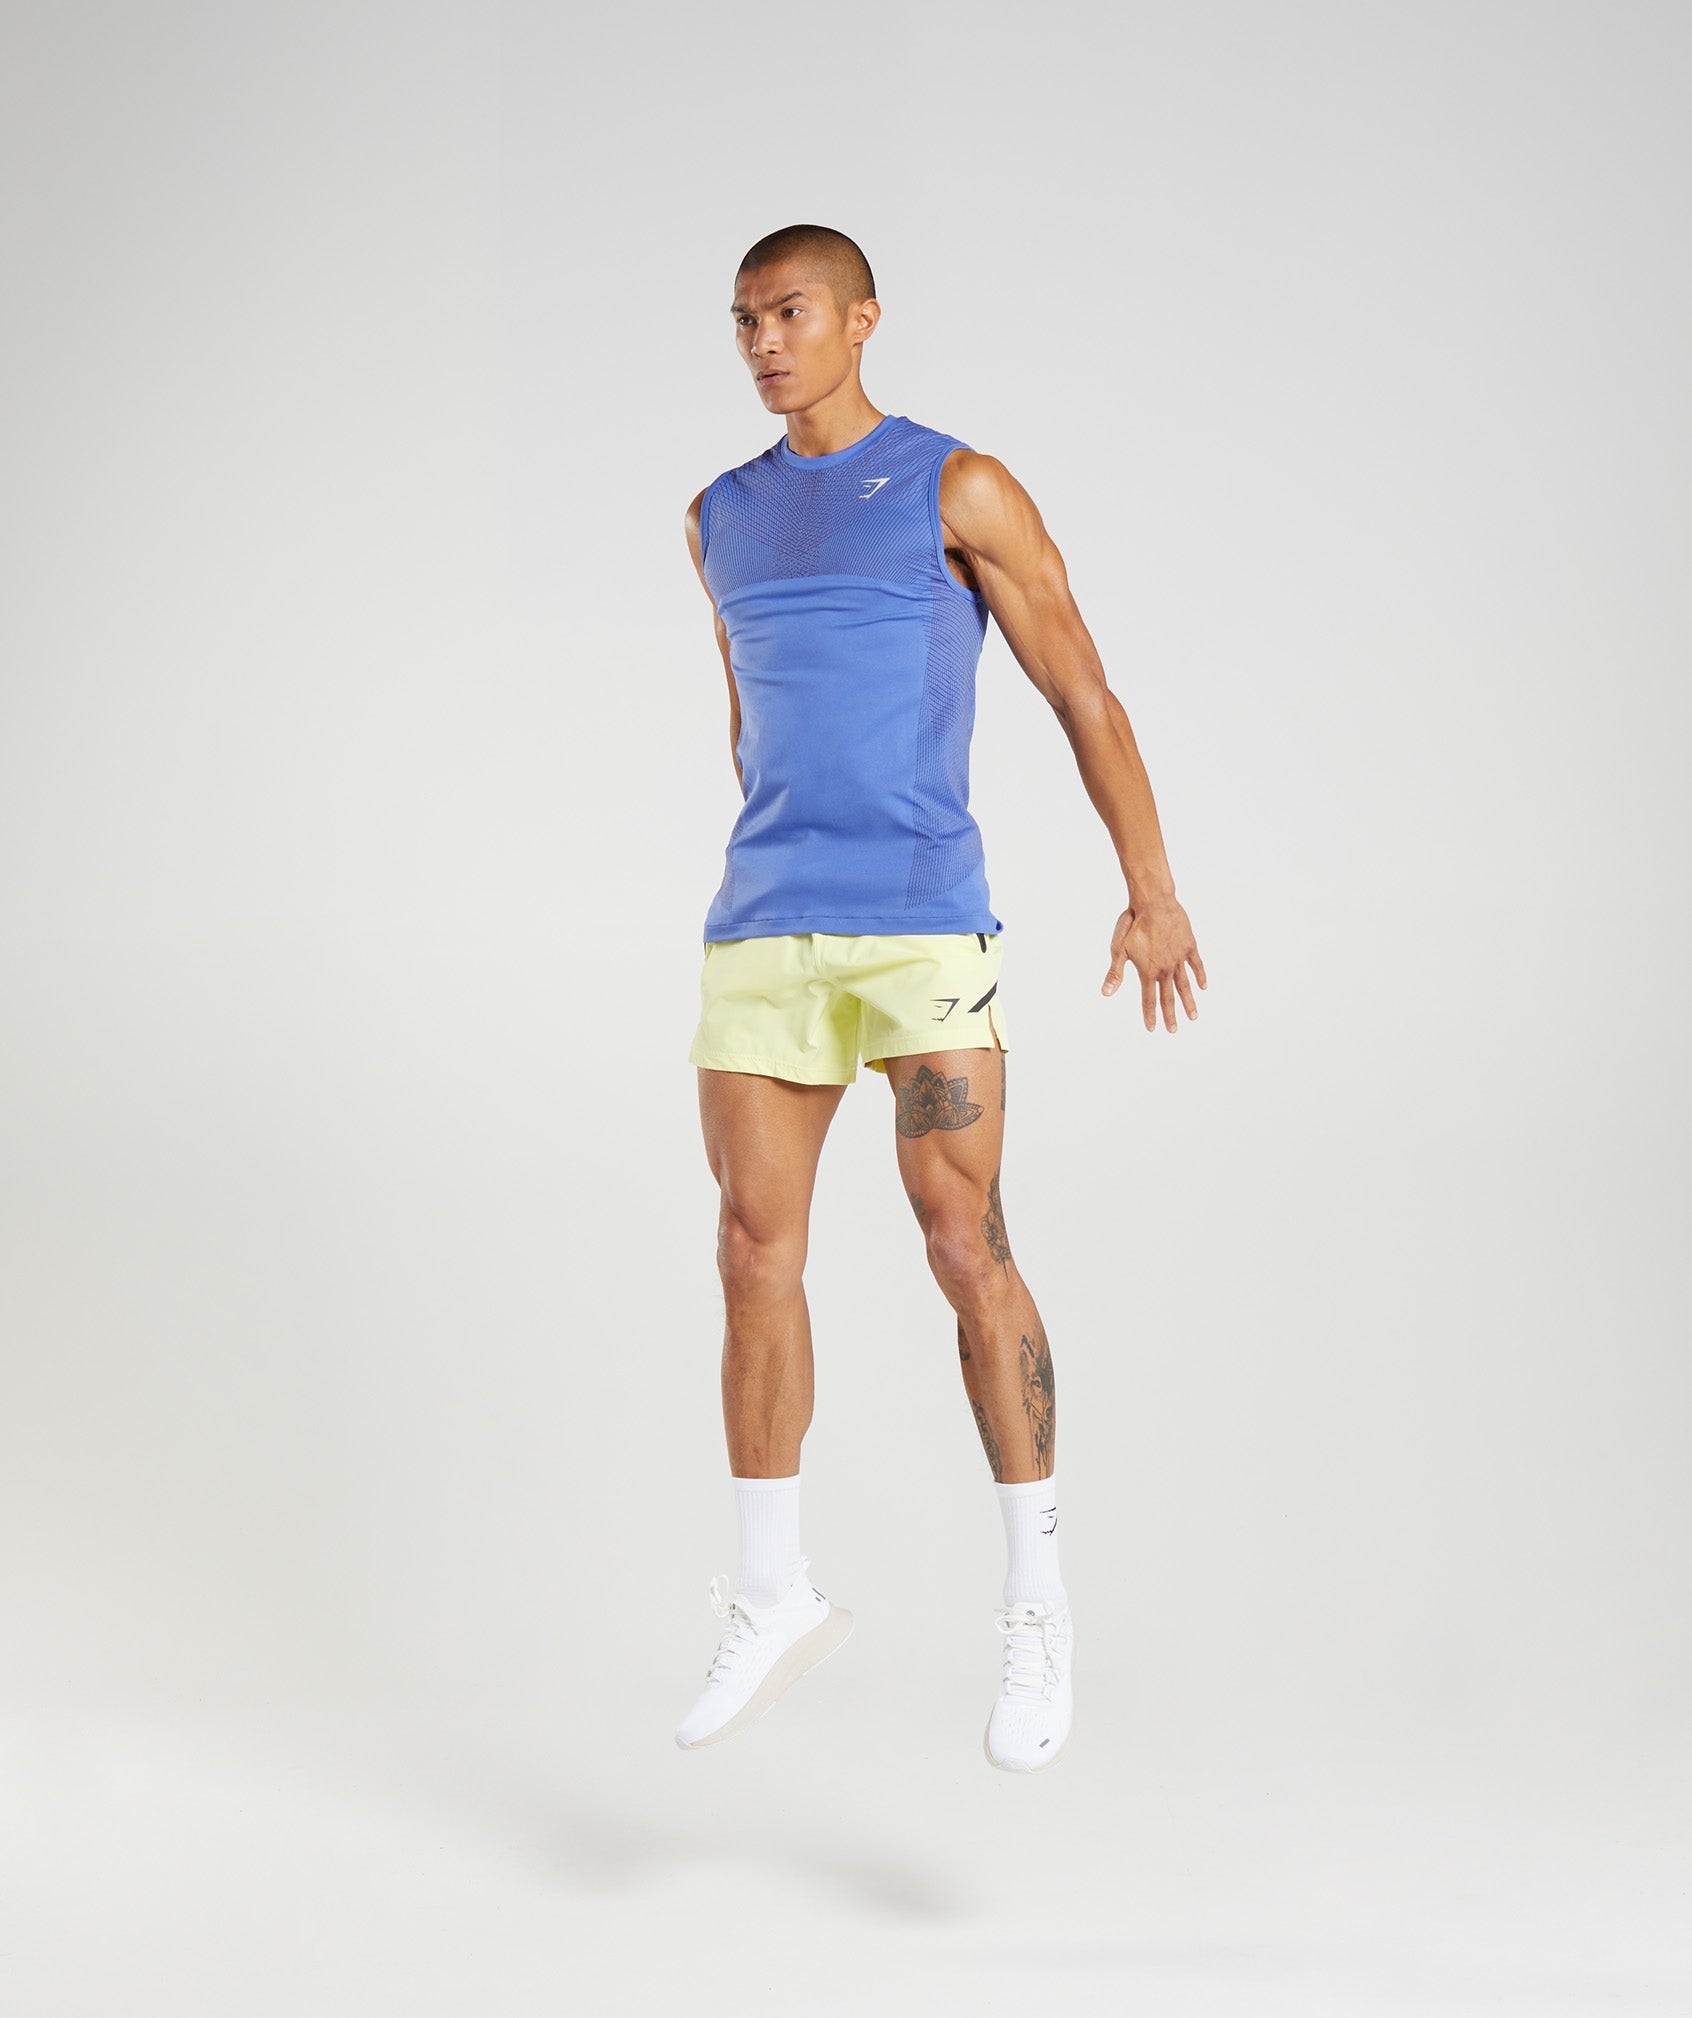 Apex Seamless Tank in Court Blue/Onyx Grey - view 4